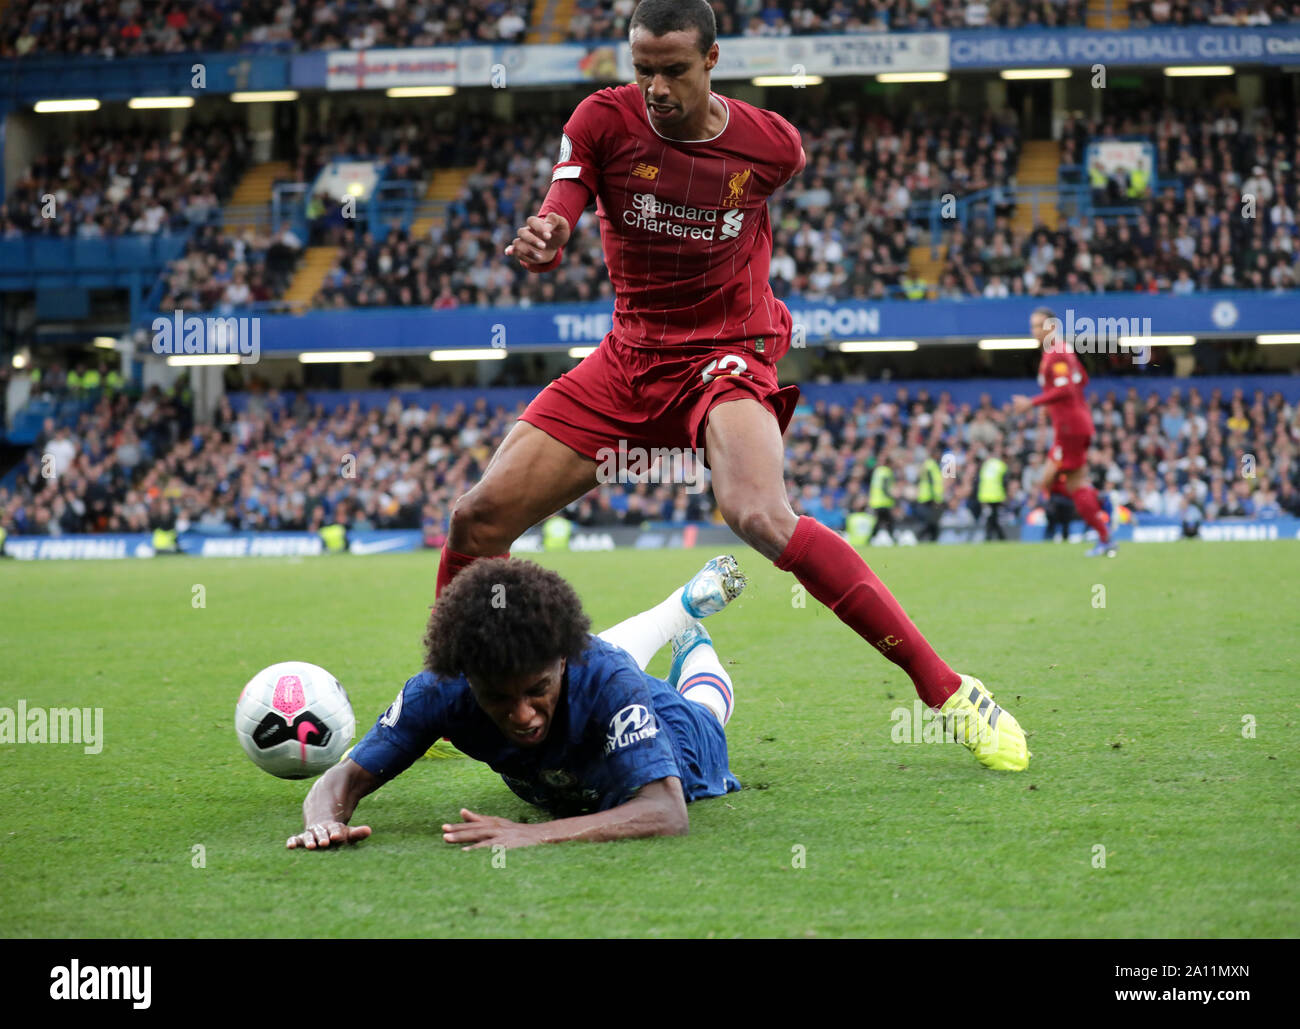 LONDON, ENGLAND - SEPTEMBER 22: Liverpool’s Joel Matip tackles Chelsea’s Willian during the Premier League match between Chelsea FC and Liverpool FC at Stamford Bridge on September 22, 2019 in London, United Kingdom. (Hugo Philpott/MB Media) Stock Photo